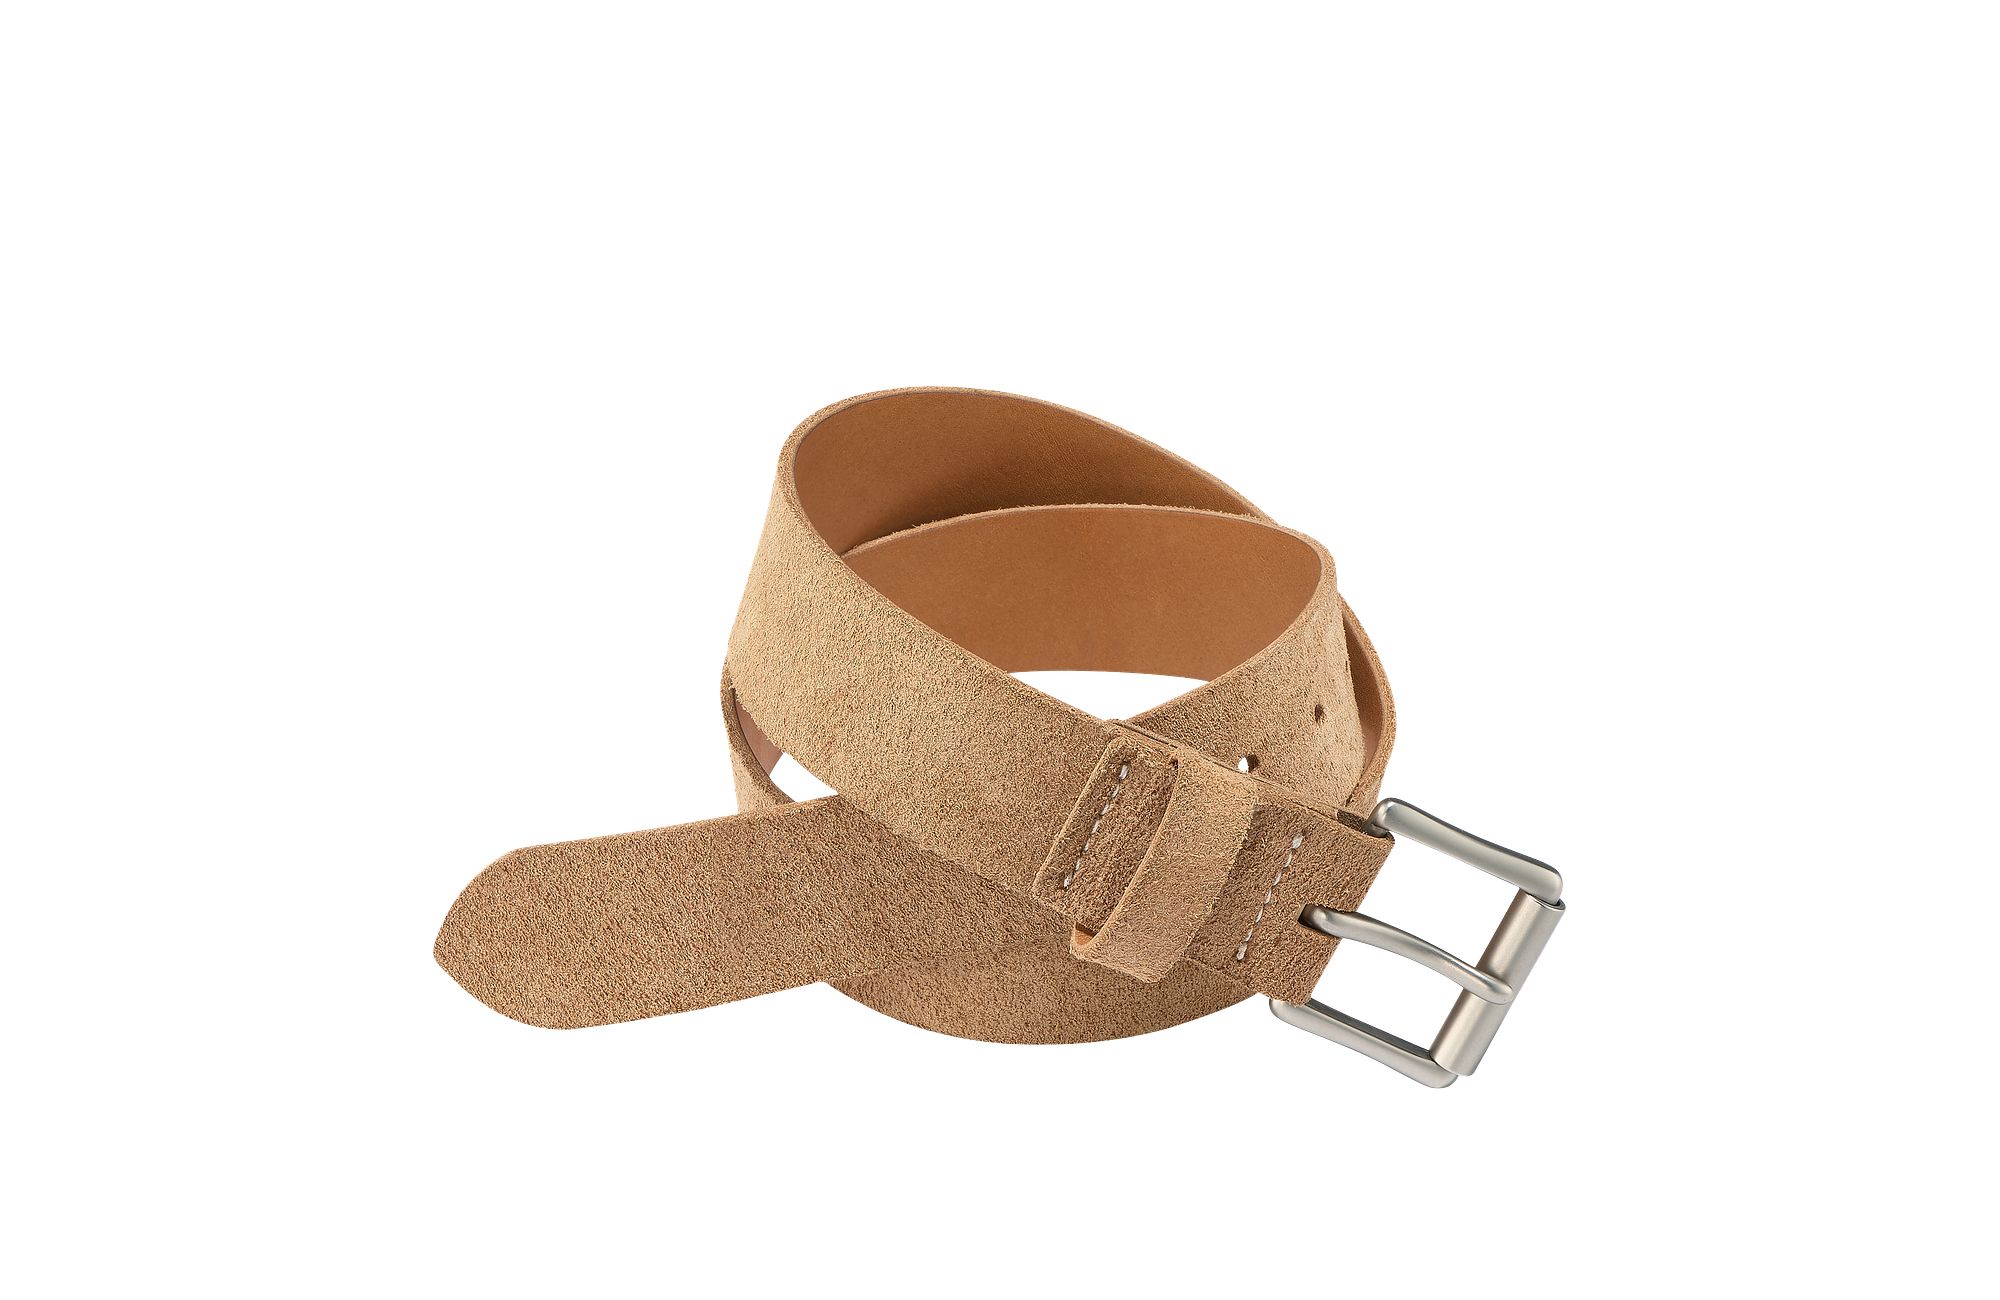 Unisex Leather Shoelace Belt, Cord Belt. The Perfect Gift for Her & Him Red - Gold Tip